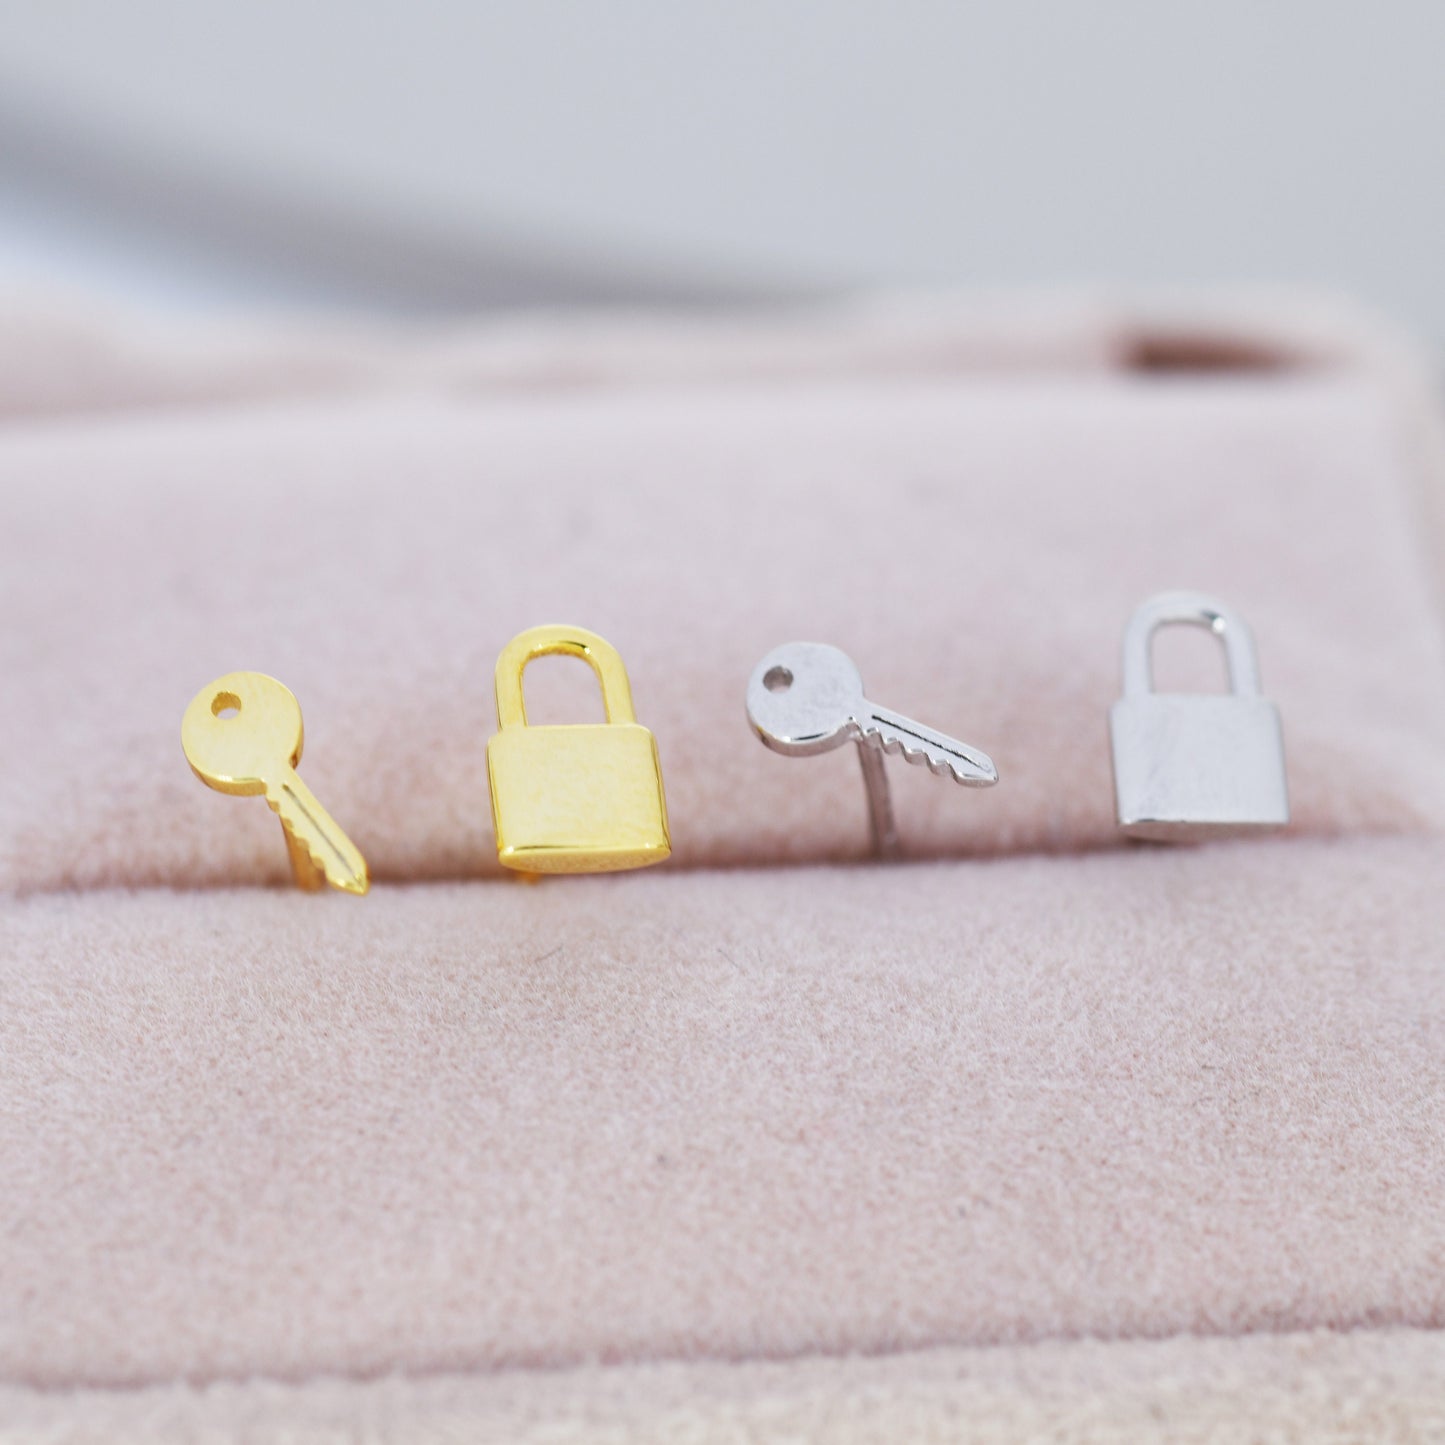 Tiny Key and Lock Mismatched Stud Earrings in Sterling Silver, Silver or Gold, Stacking Earrings